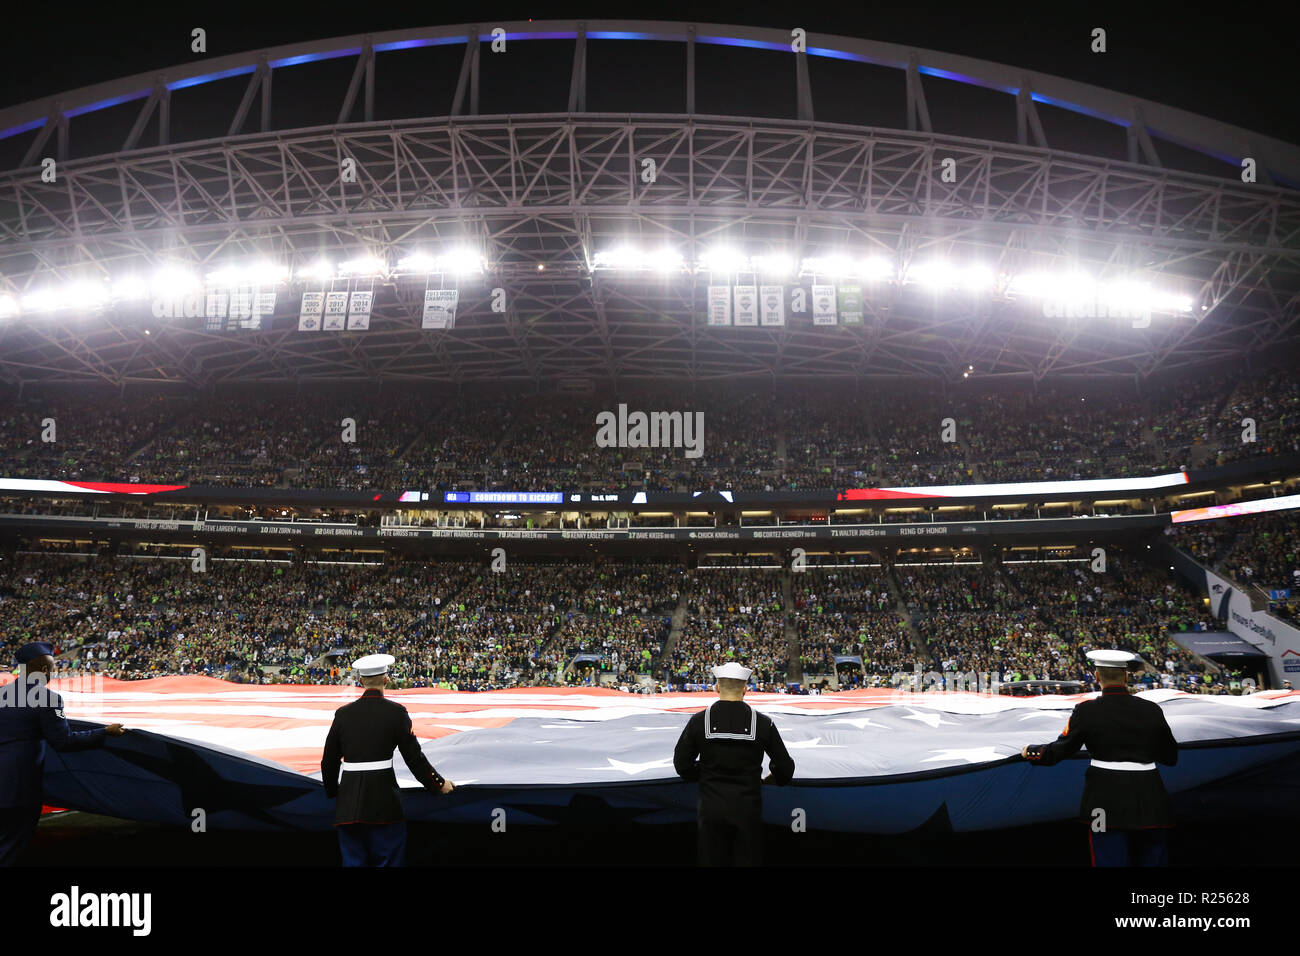 Seattle, WA, USA. 15th Nov, 2018. Members of the United States armed services hold the American flag in front of fans before a game between the Green Bay Packers and Seattle Seahawks at CenturyLink Field in Seattle, WA. Seahawks defeat the Packers 27-24. Sean Brown/CSM/Alamy Live News Stock Photo